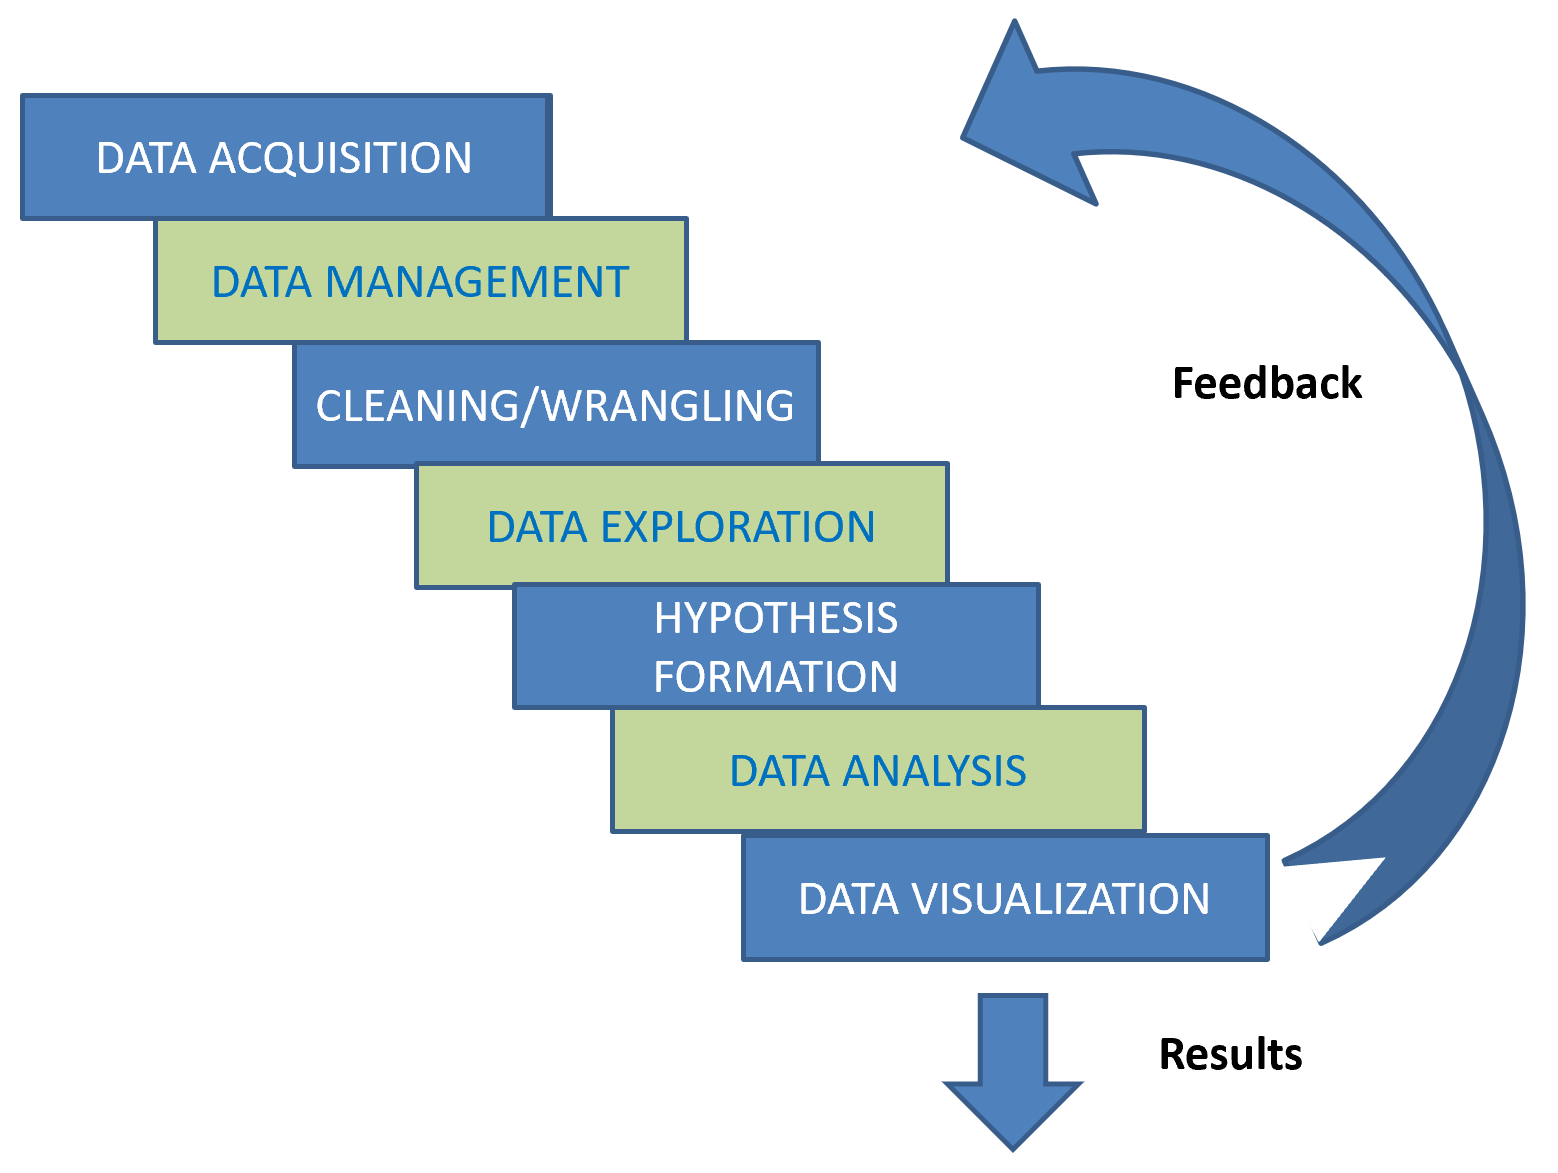 Diagram of steps in the data science pipeline: data acquisition, data management, cleaning/wrangling, data exploration, hypothesis formation, data analysis, data visualization producing results or a feedback loop to an earlier step